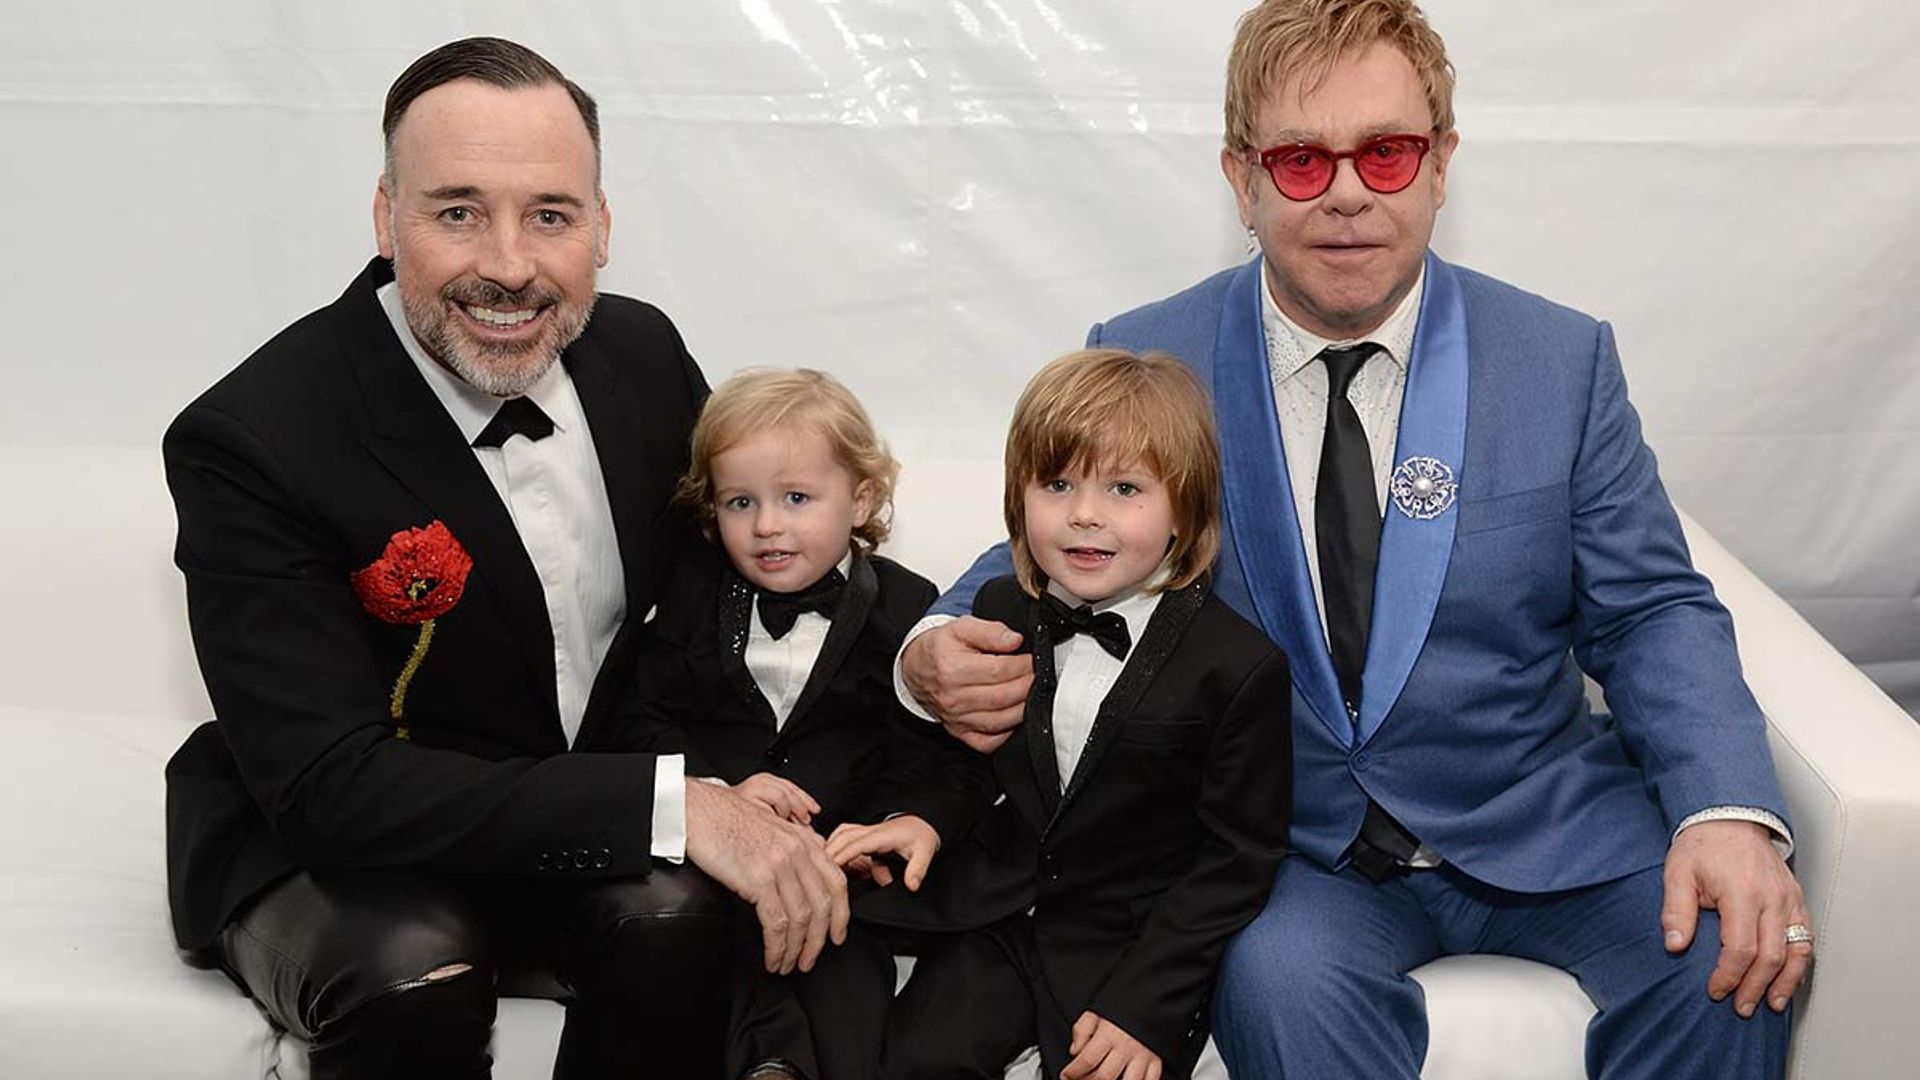 Elton John’s fans spot hilarious detail in photo with sons